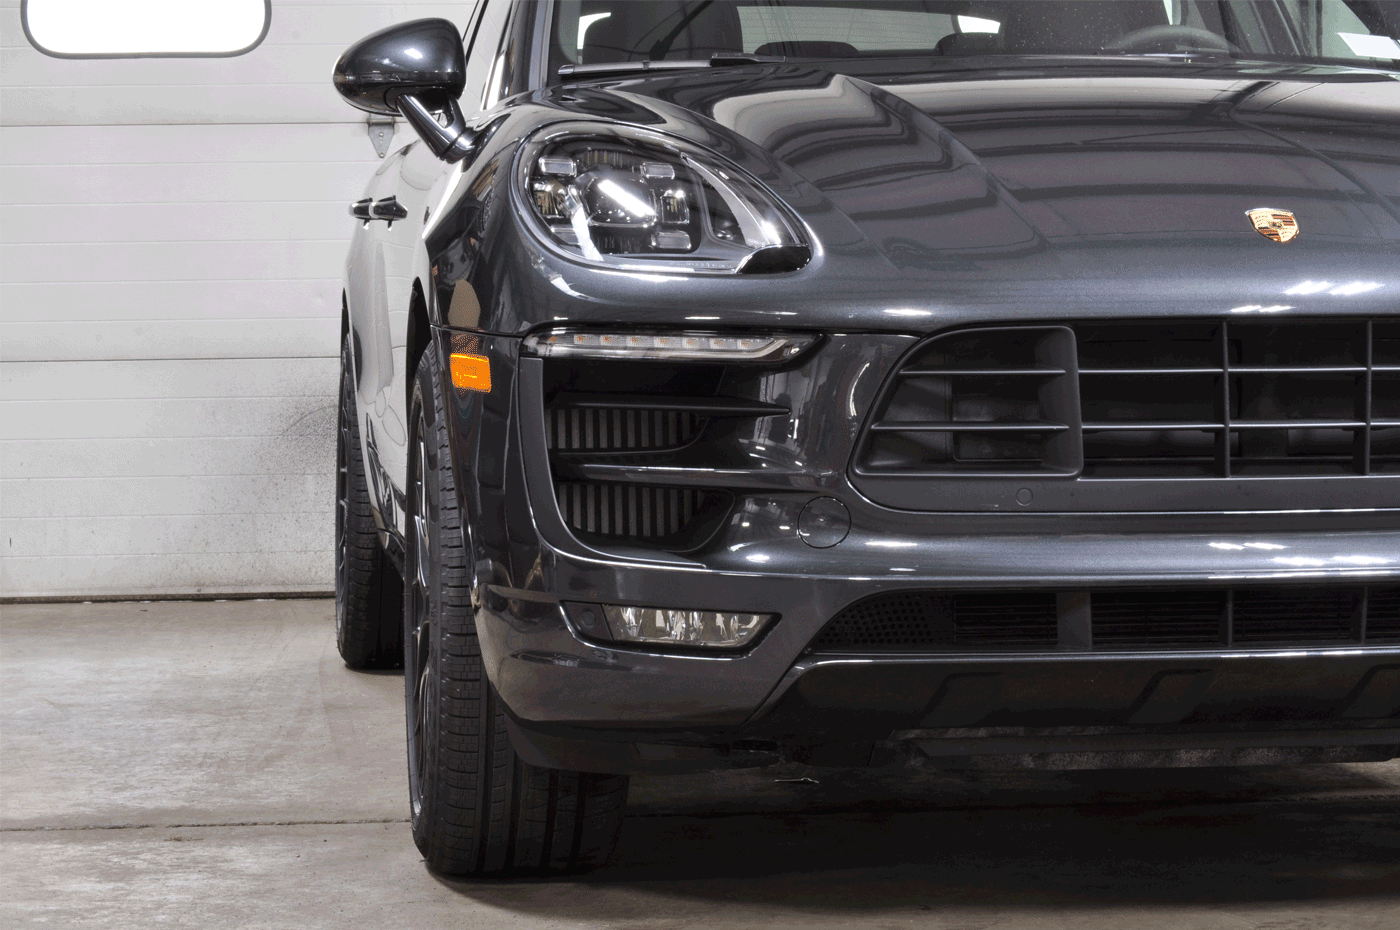 Porsche Macan Wheel Spacers Before and After